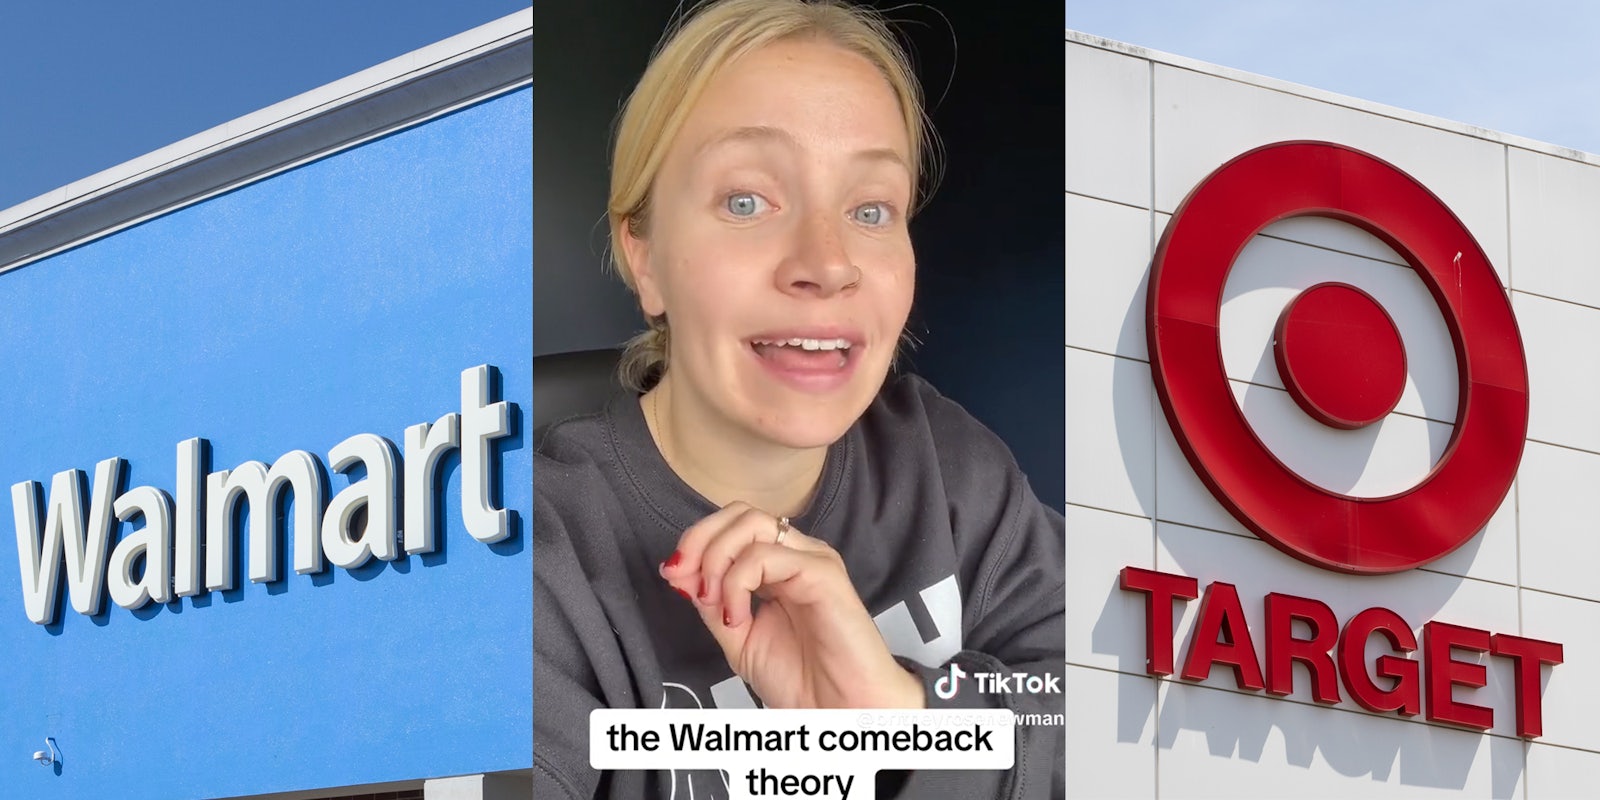 Outside of store Walmart logo on blue wall(l), Blonde woman speaking with text below that says 'the walmart comeback theory'(c), A target logo and text outside of store(r)